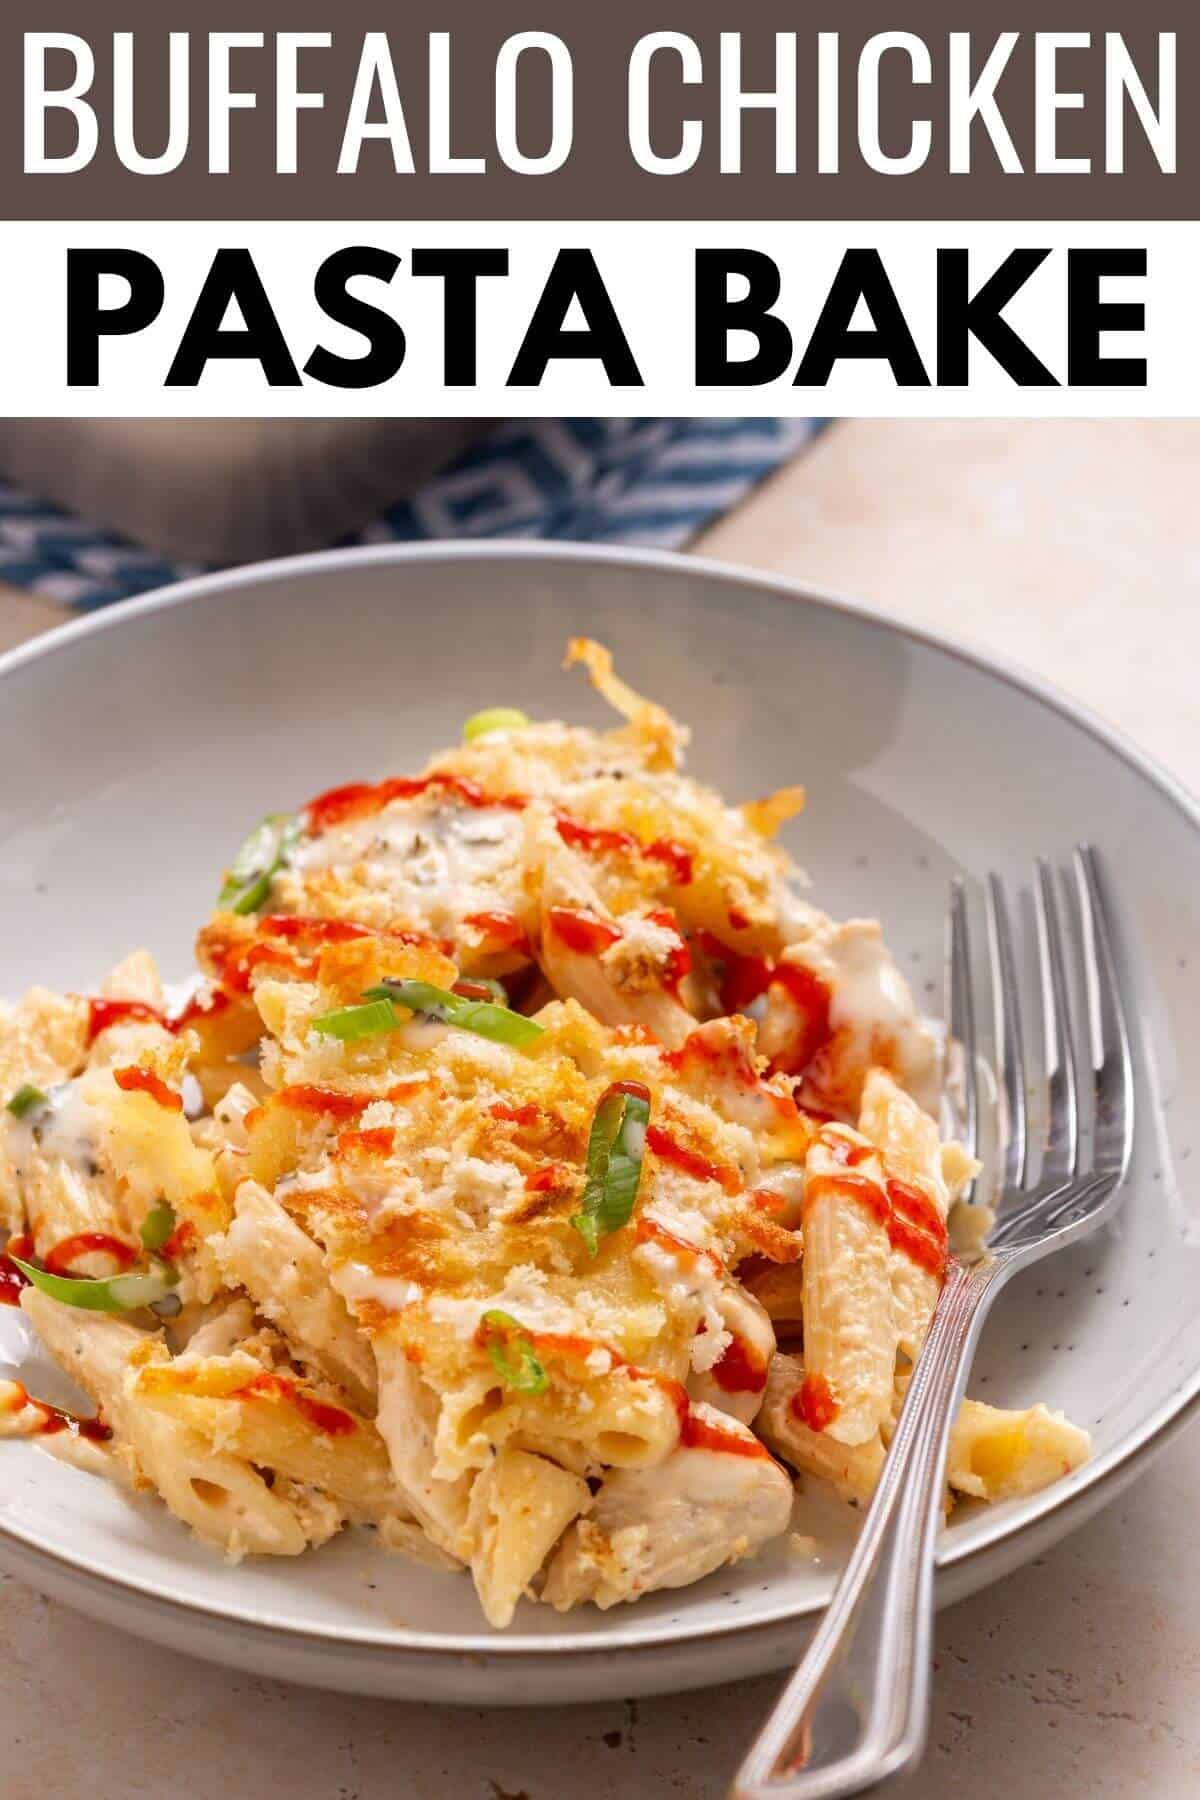 Buffalo chicken pasta bake with recipe title text.